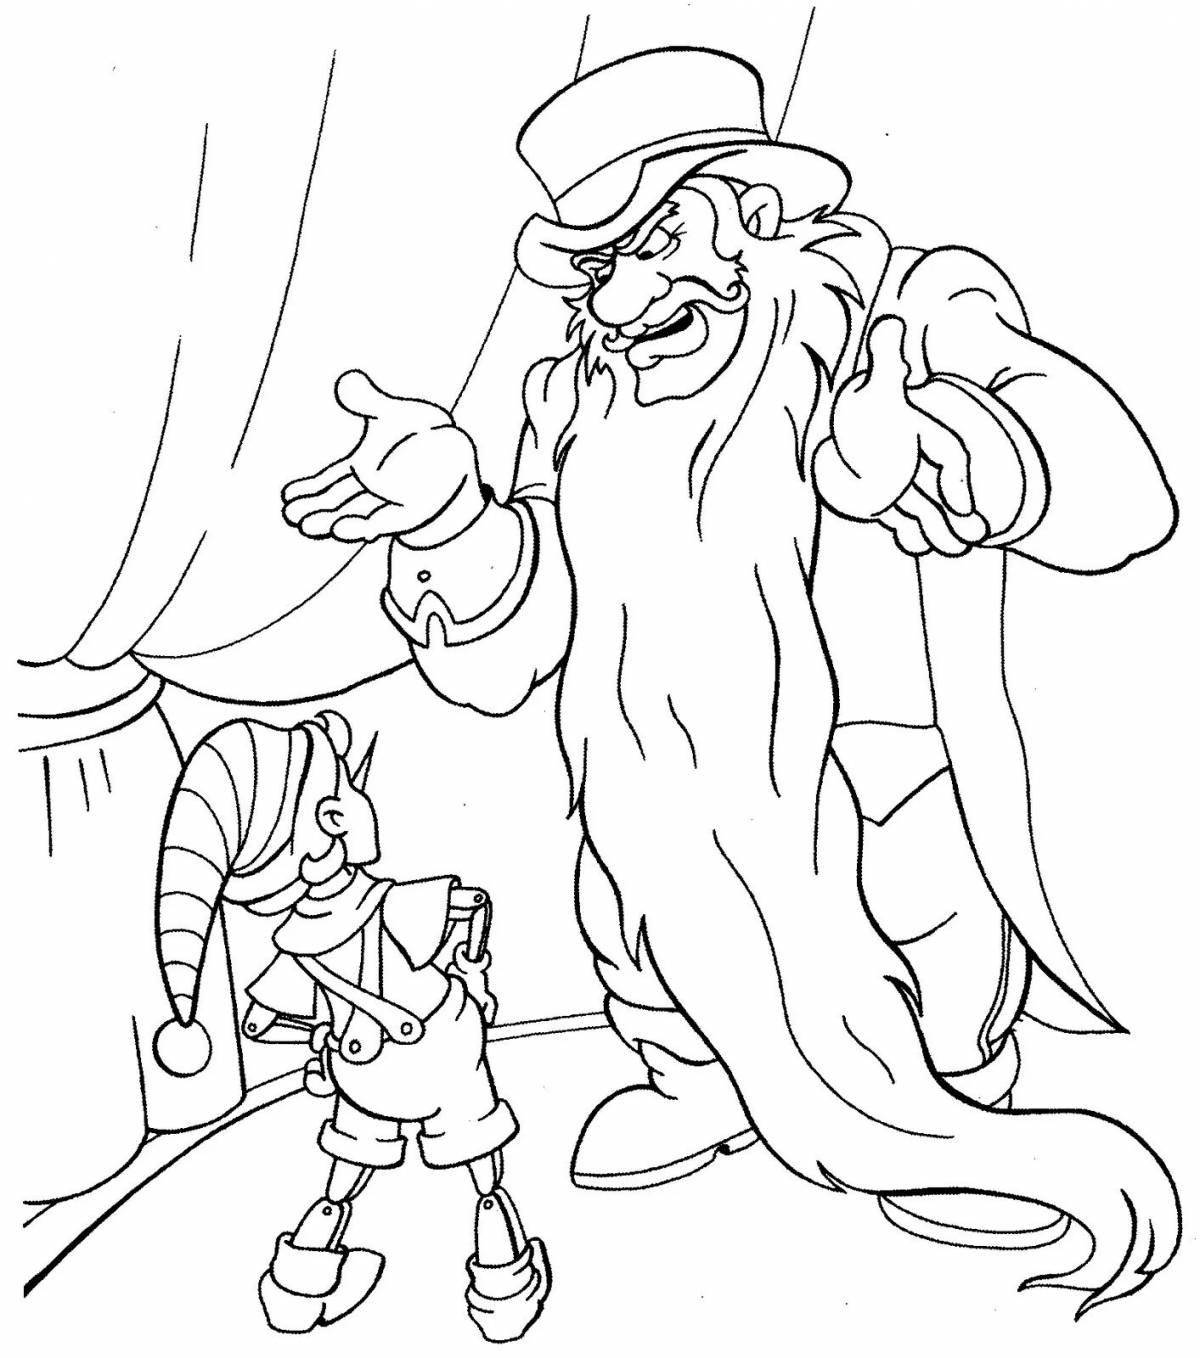 Uncle au's exciting coloring page